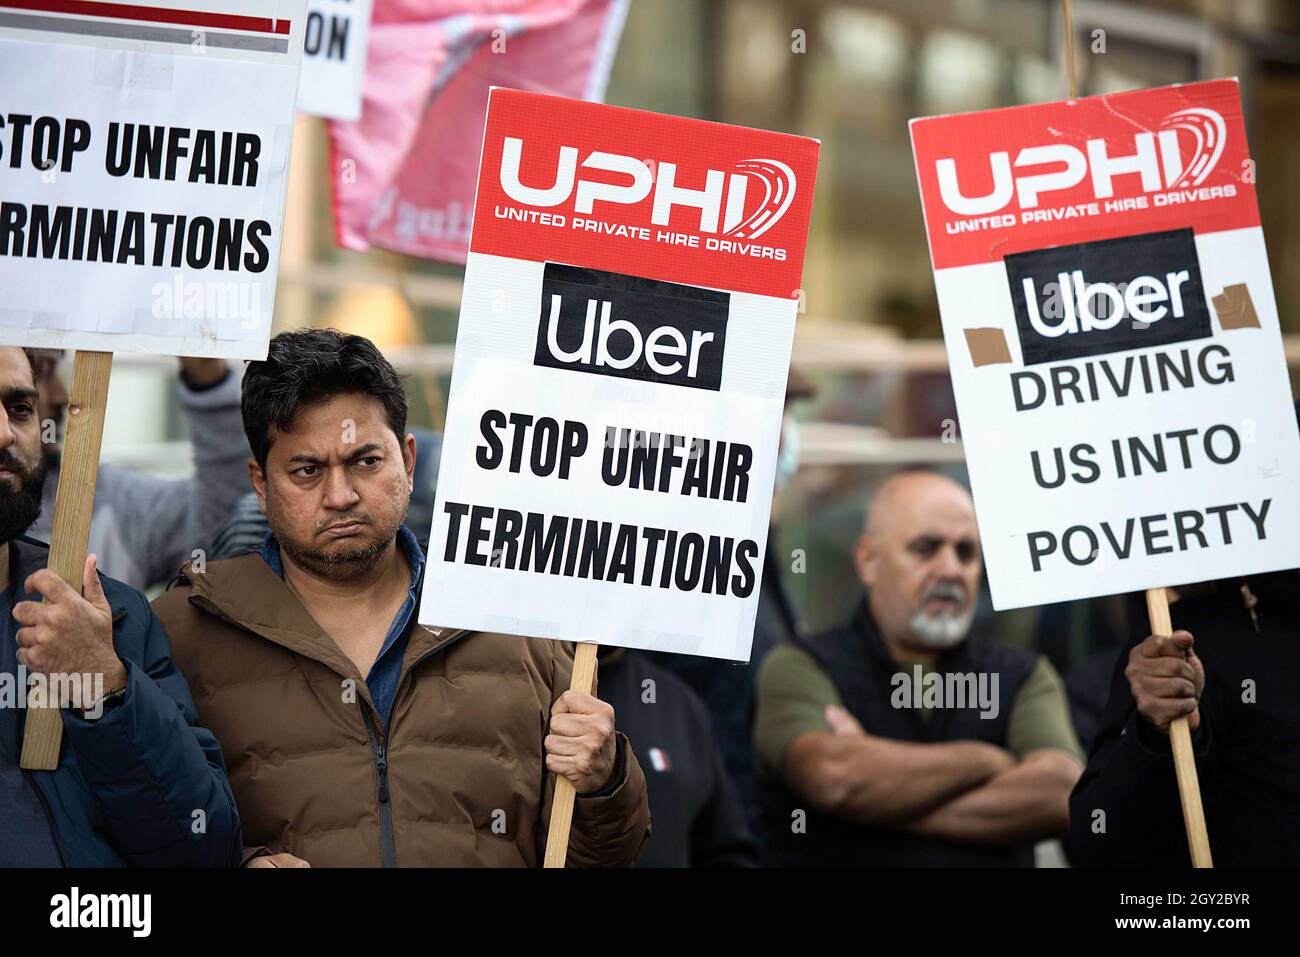 London, UK. 06th Oct, 2021. Uber drivers strike holding placards at Uber's headquarters, during the demonstration. Uber drivers held a strike in London during a 24-hour action to demand better rate per mile, 15% max commission, transparency of charges on customers, no fixed rate trips, 50% surcharge on out of area trips, no more unfair deactivations, and reinstatement of unfairly deactivated drivers. Credit: SOPA Images Limited/Alamy Live News Stock Photo